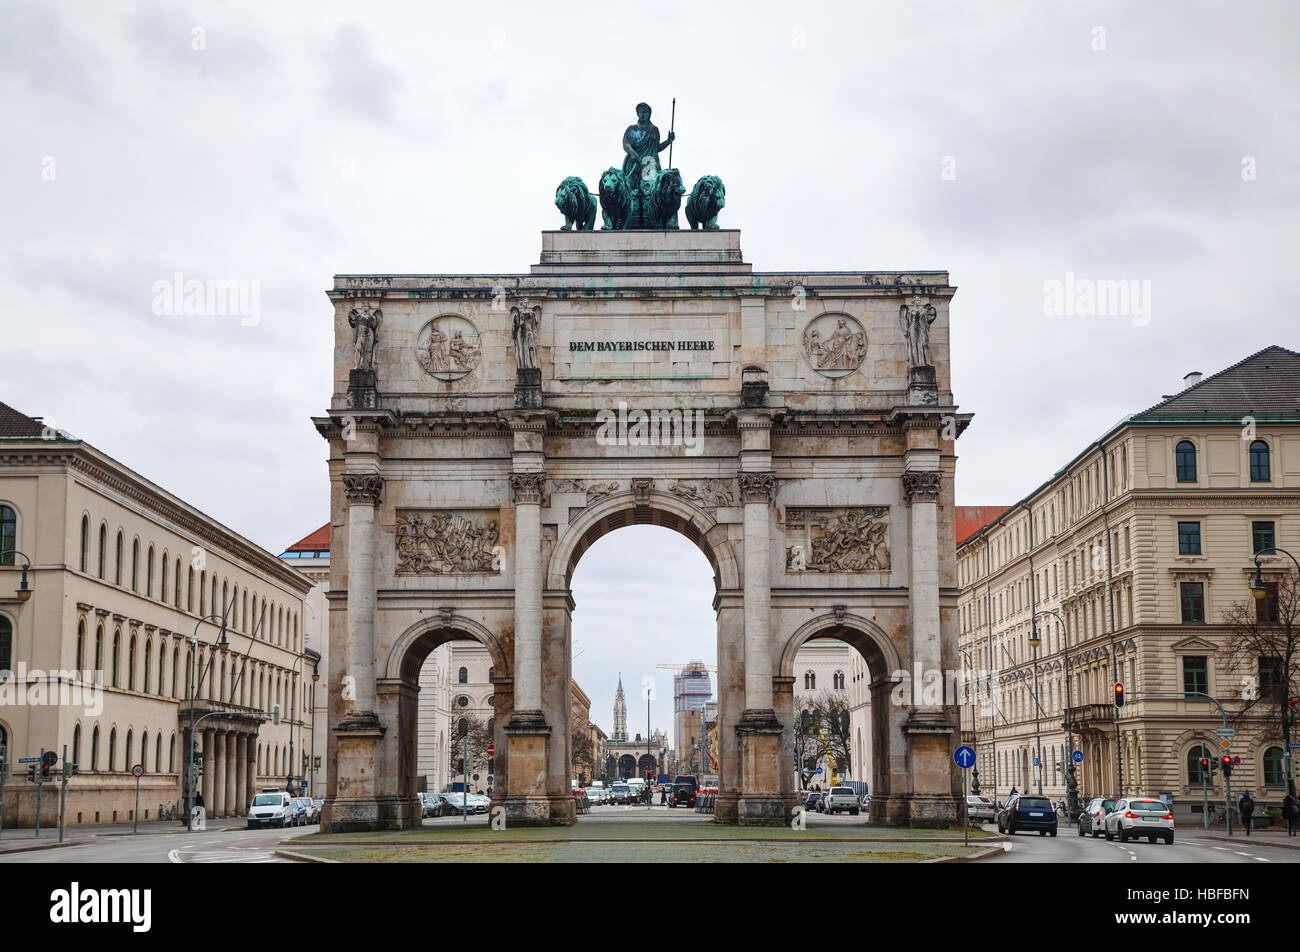 Victory Gate triumphal arch (Siegestor) in Munich, Germany Stock Photo